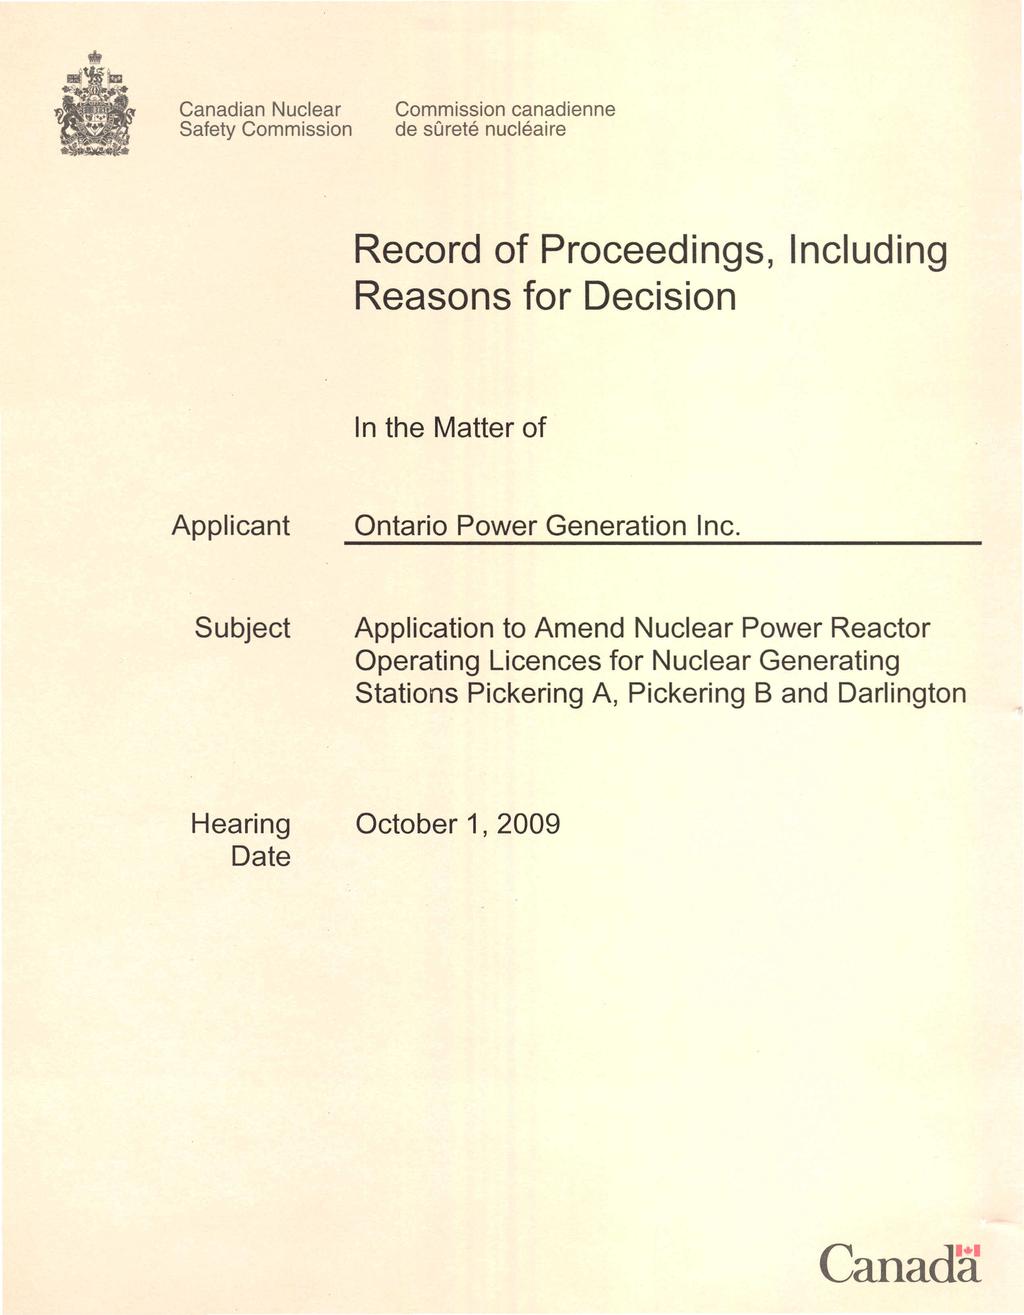 Canadian Nuclear Commission canadienne Safety Commission de sqrete nucleaire Record of Proceedings, Reasons for Decision Including Applicant Subject